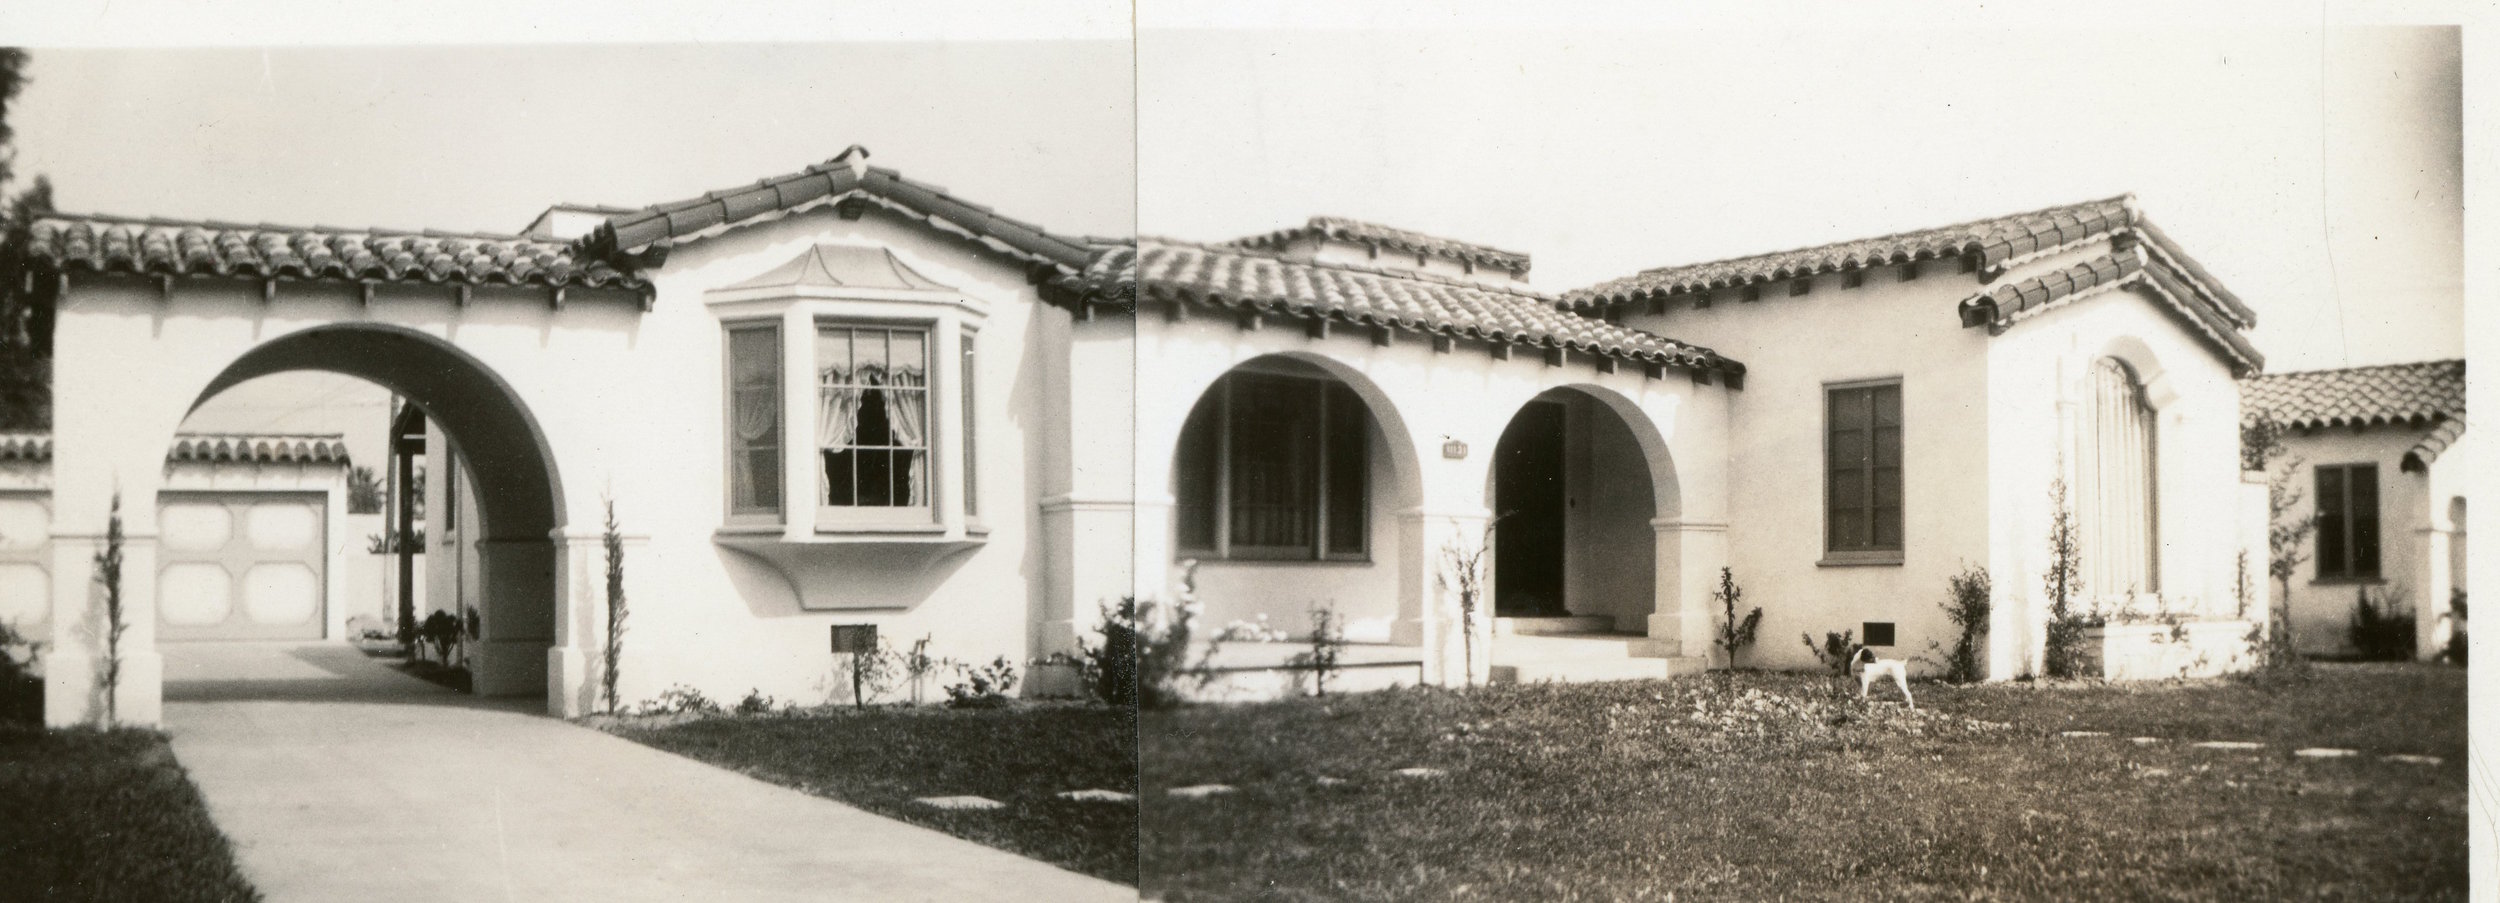 The Roadster House in 1935